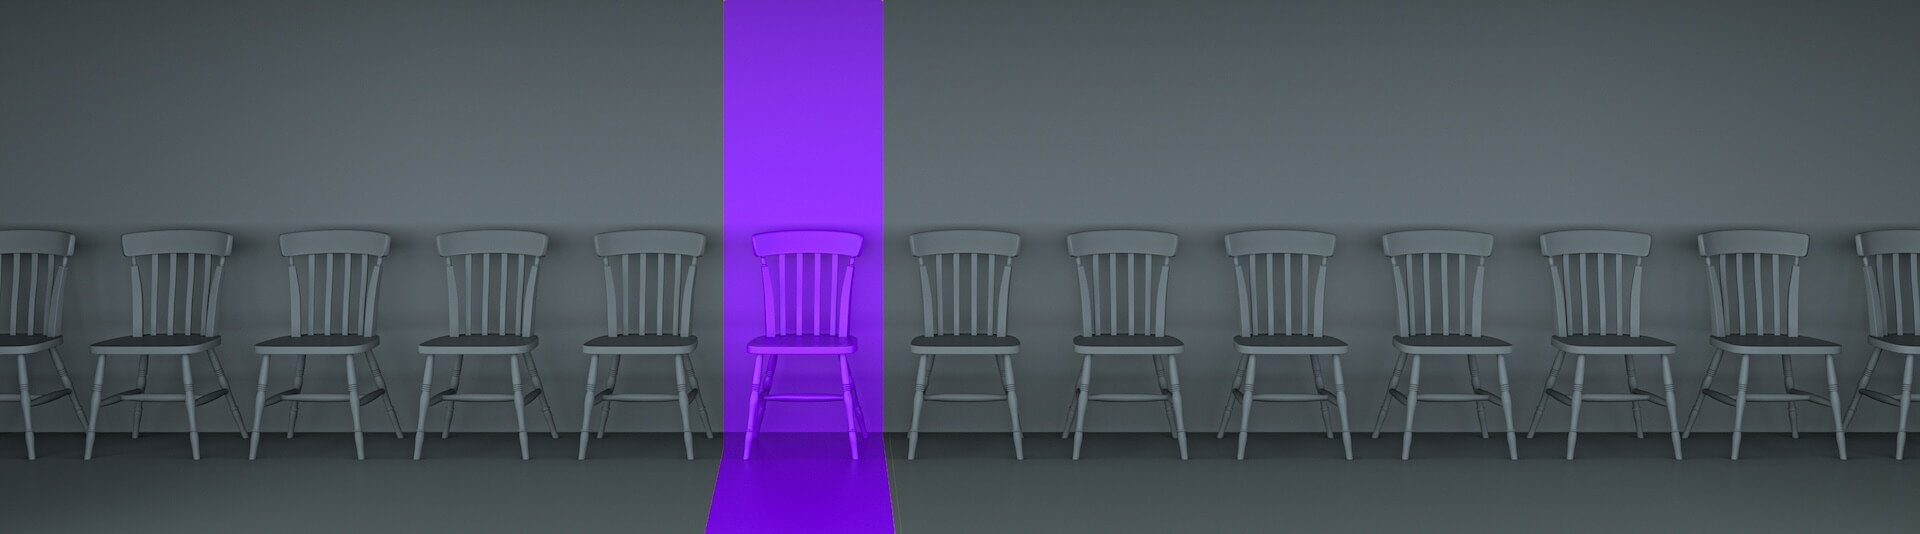 row of chairs with one lit up purple